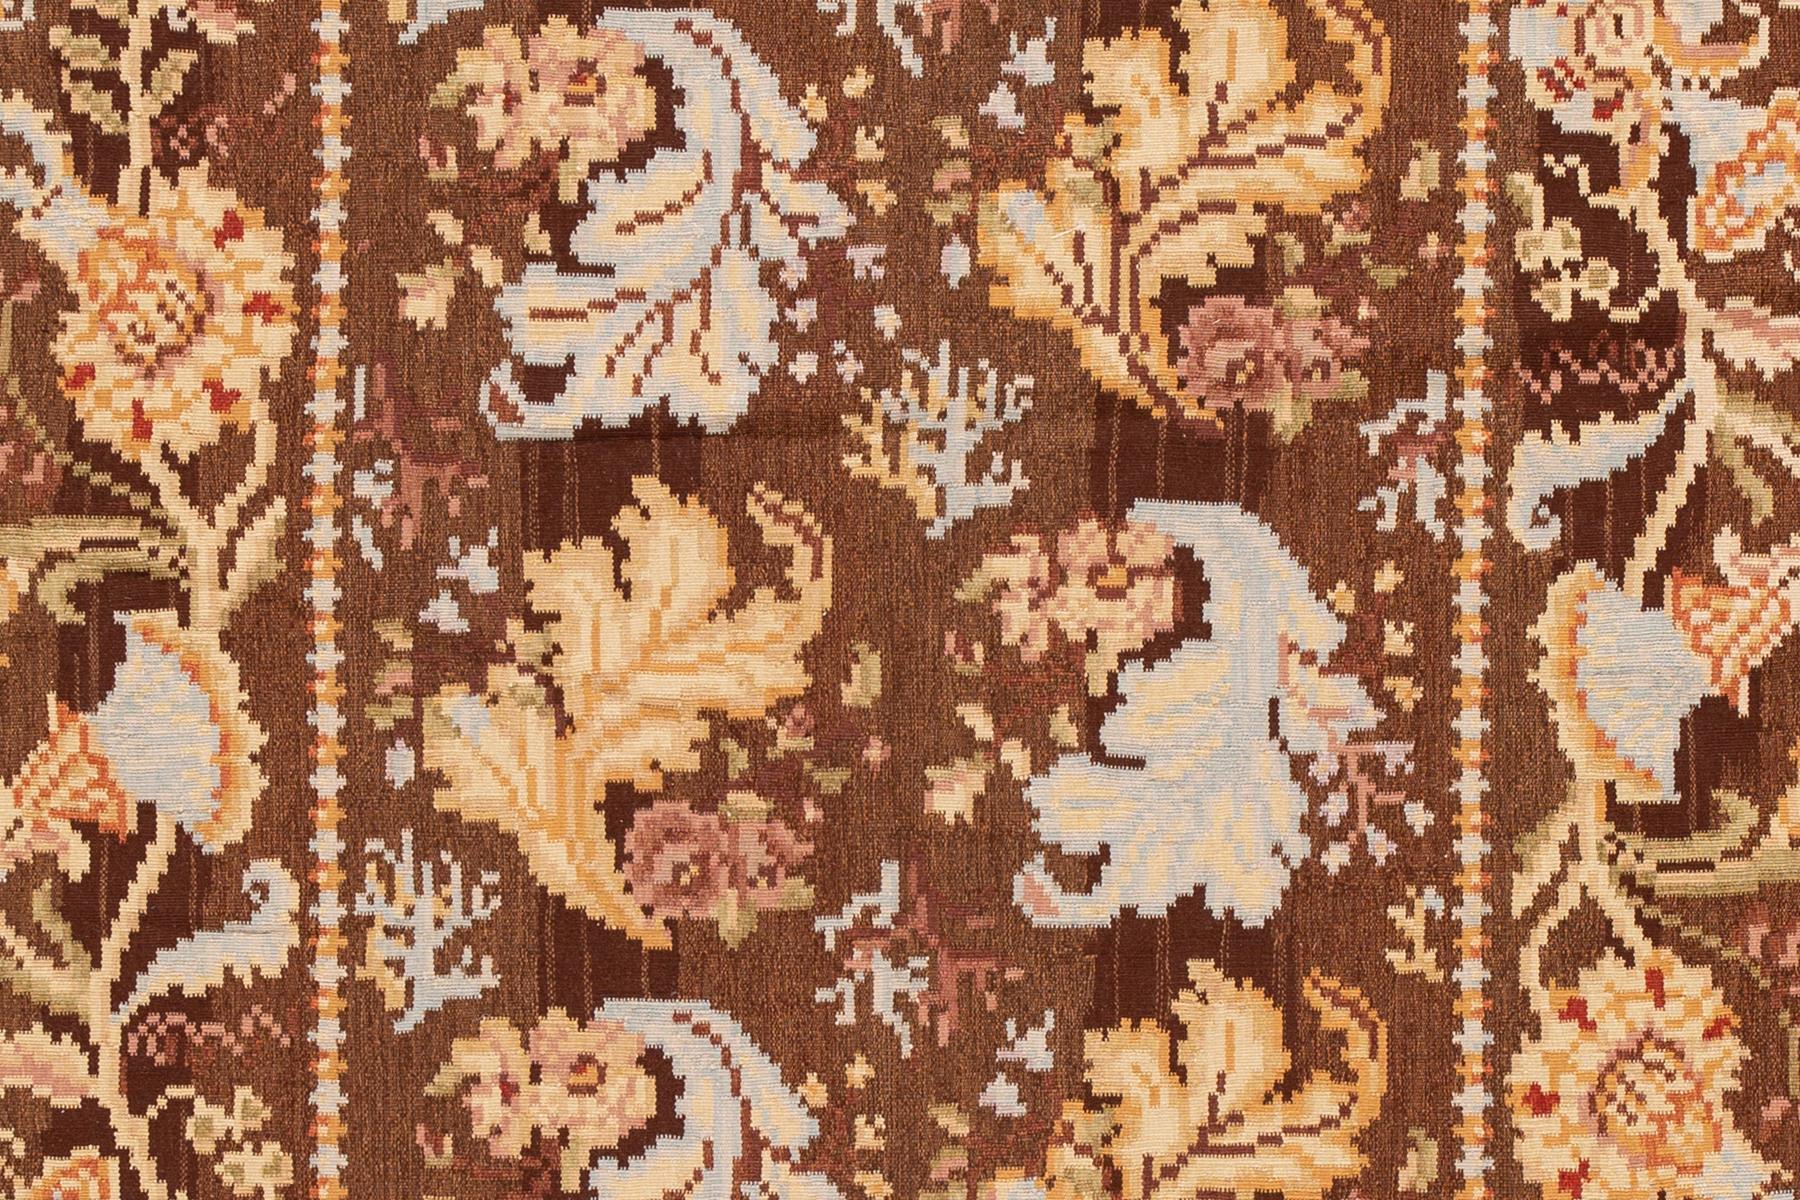 Modern flat-weave Kilim rug with an all-over floral design. This piece has fine details, great colors, and a beautiful design. It would be the perfect addition to your home. This rug measures 4'11